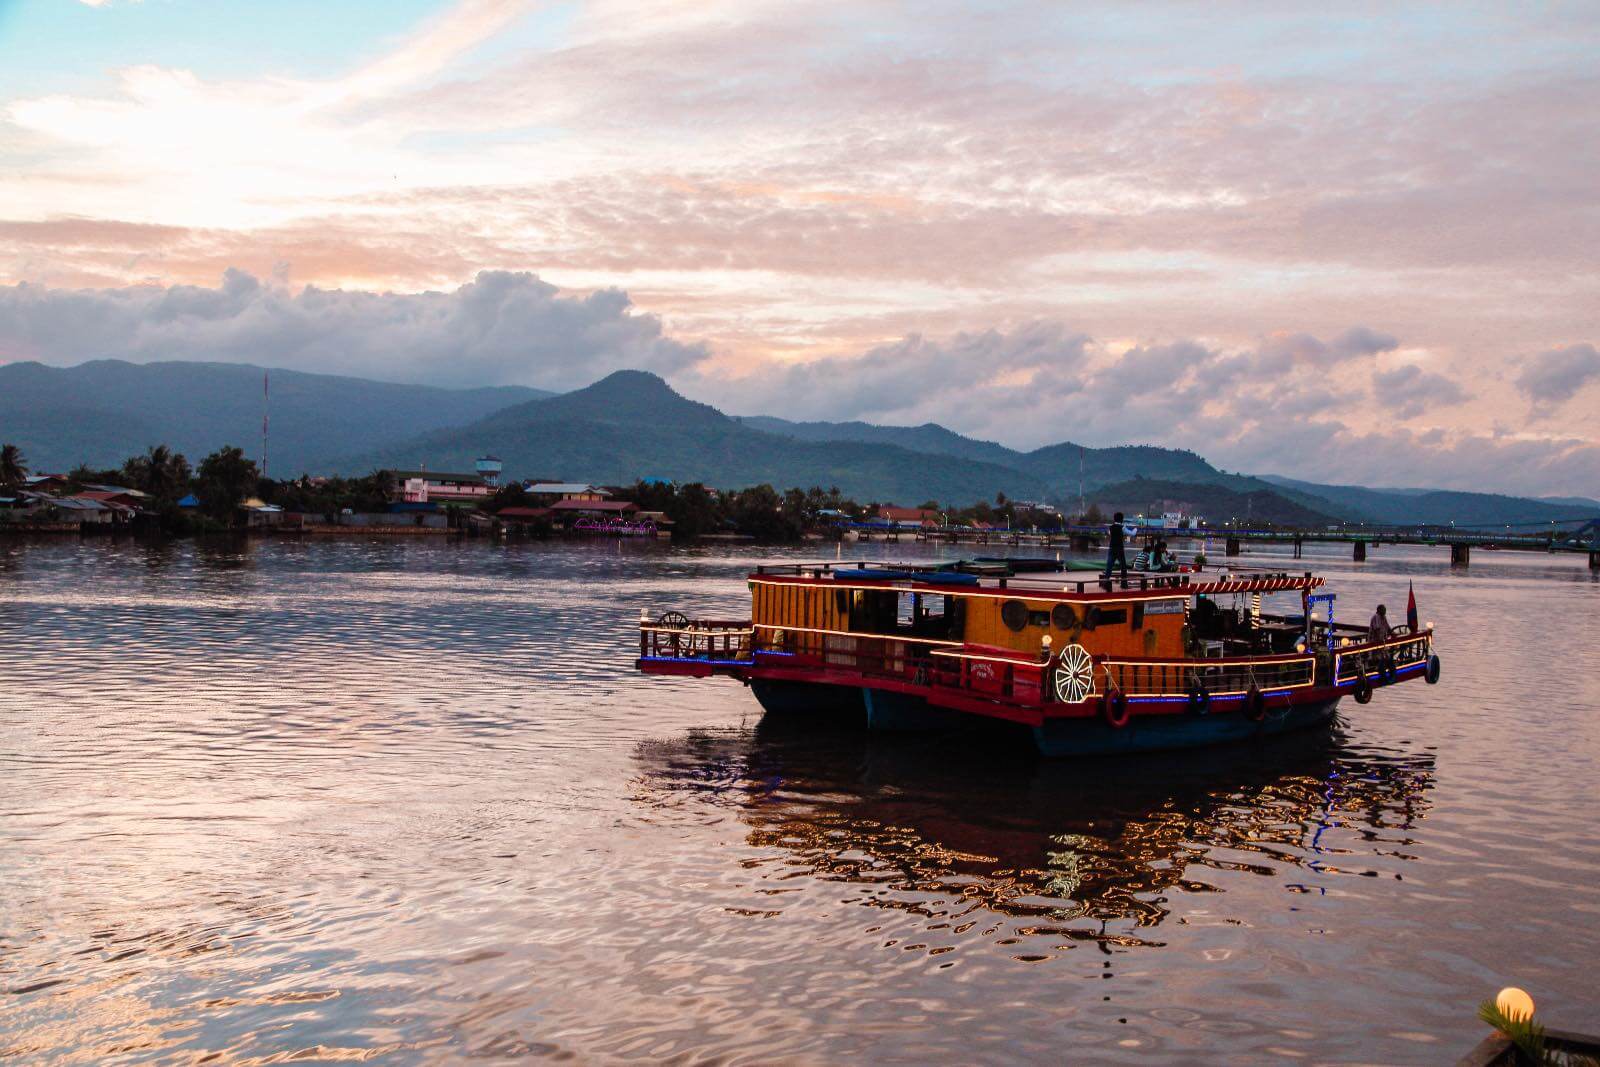 Boat floating on the Kampot river at sunset